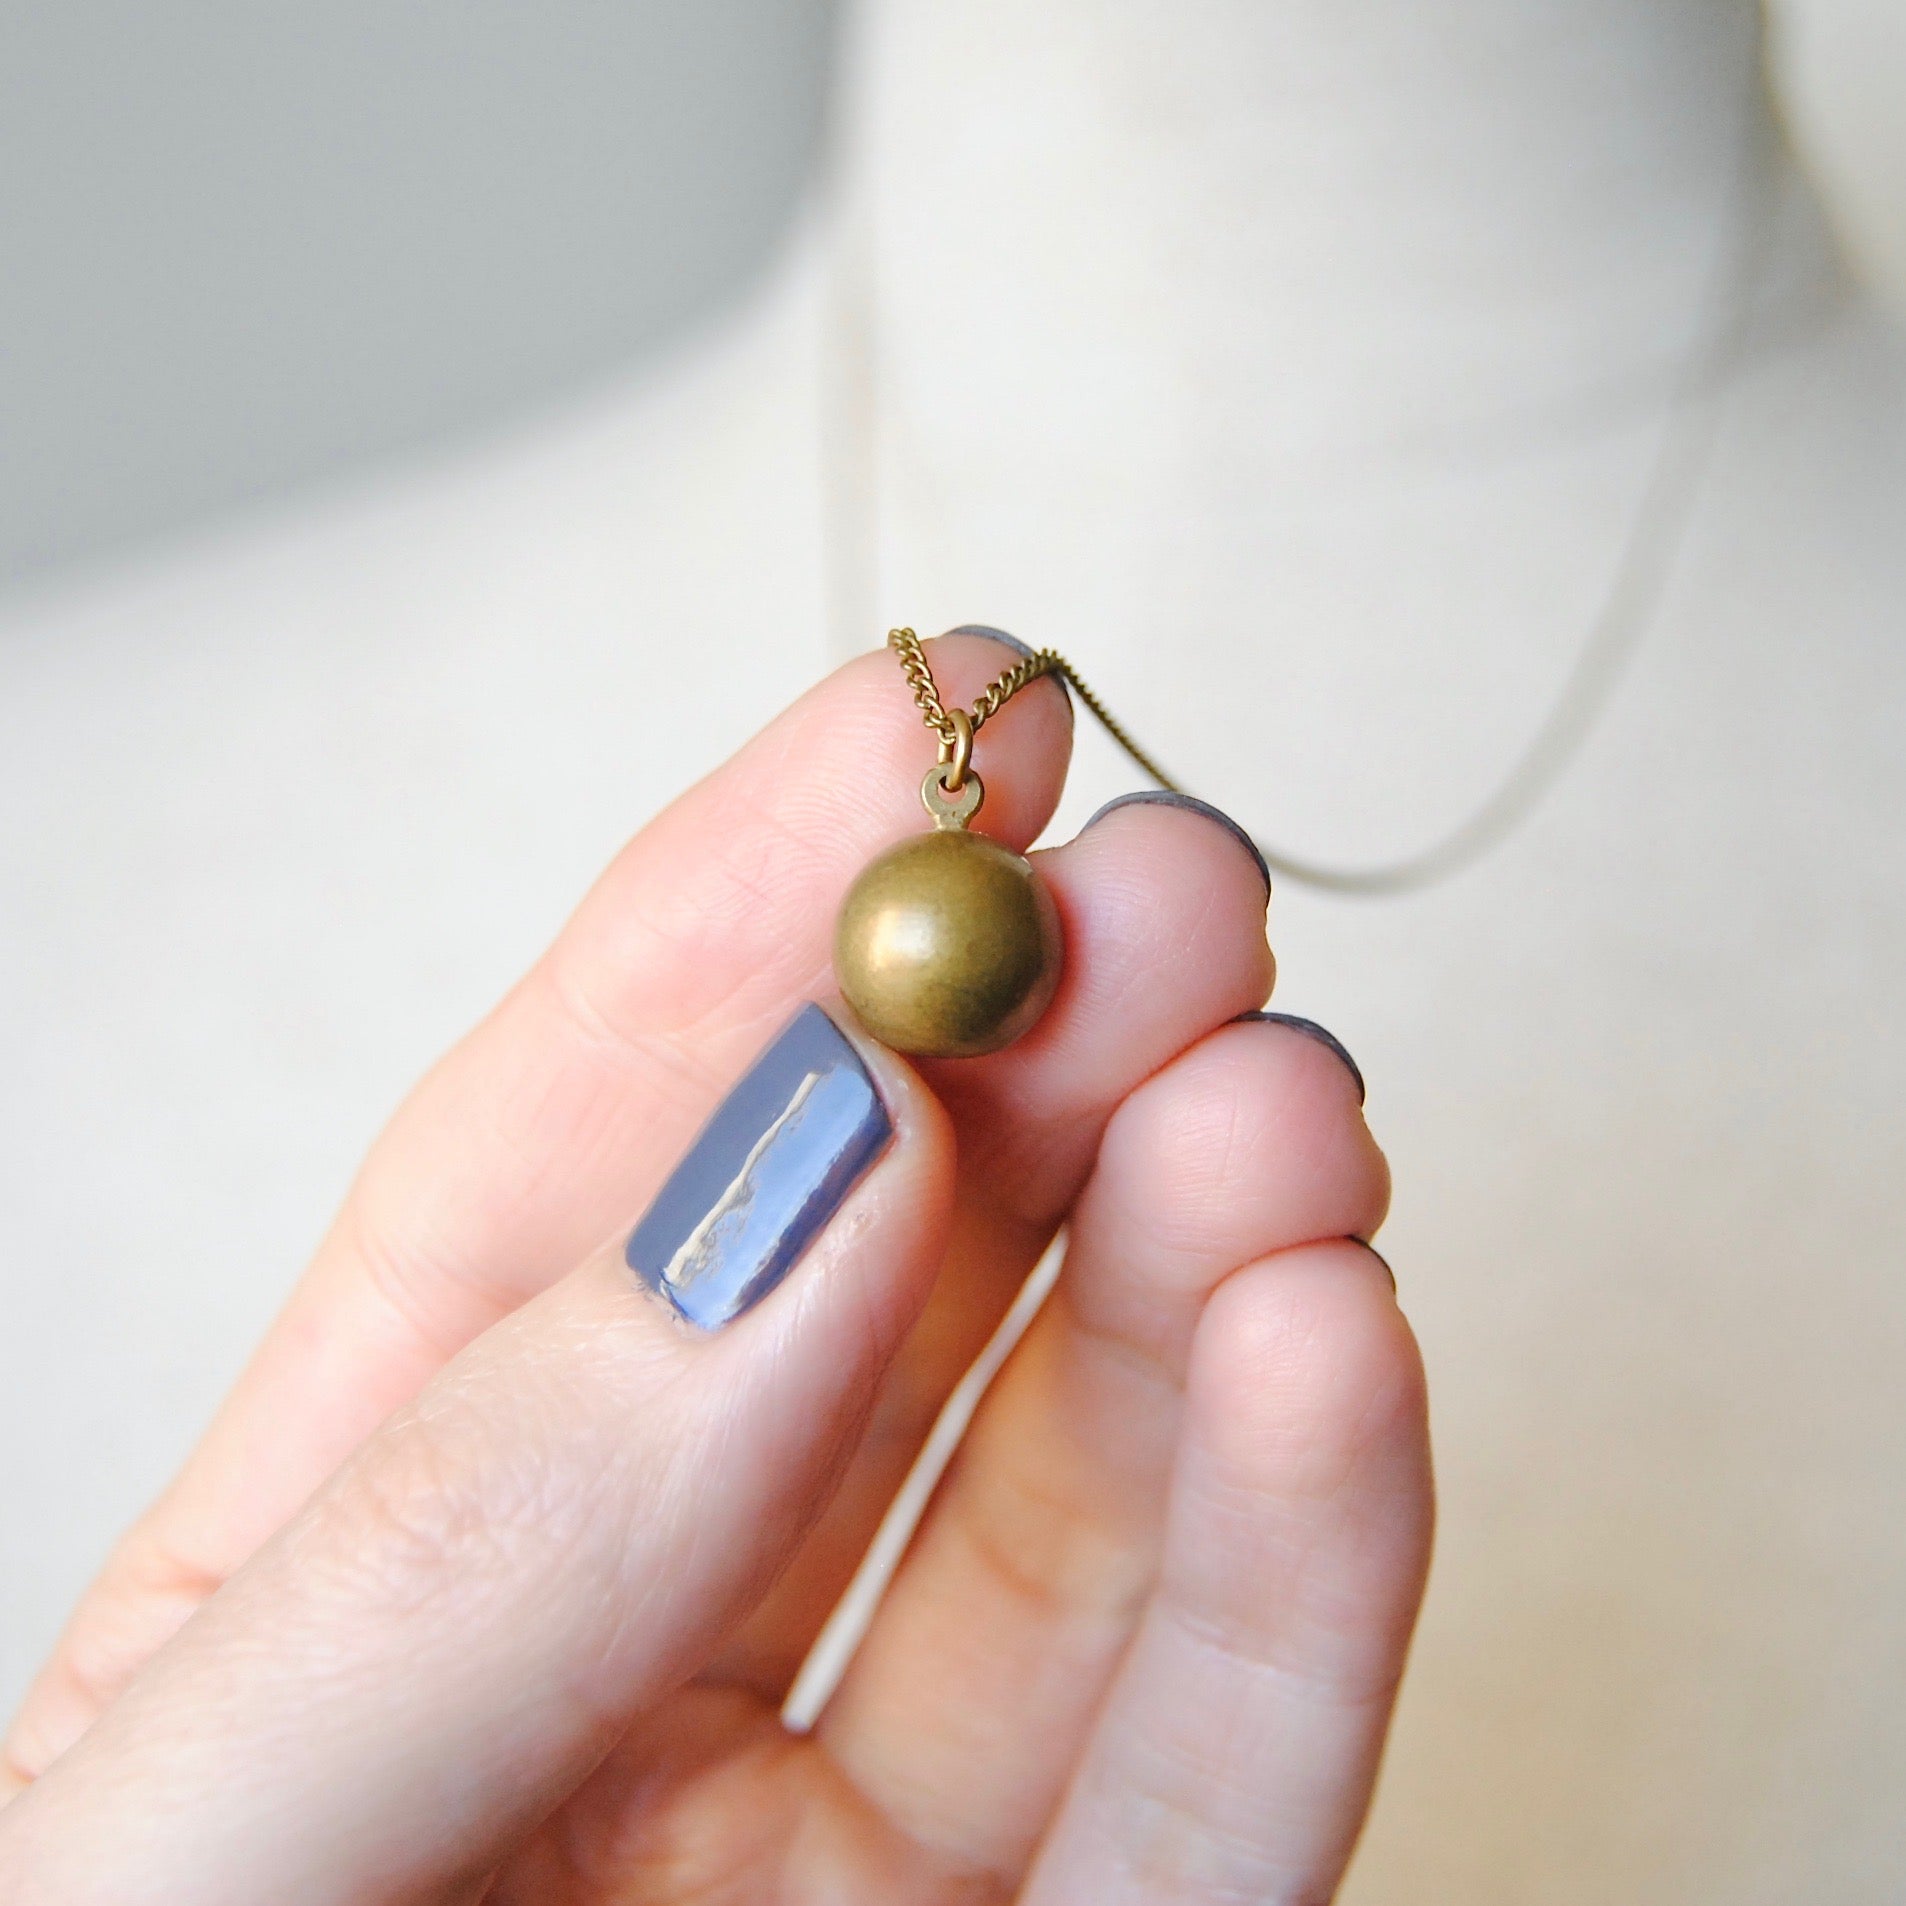 ORB NECKLACE